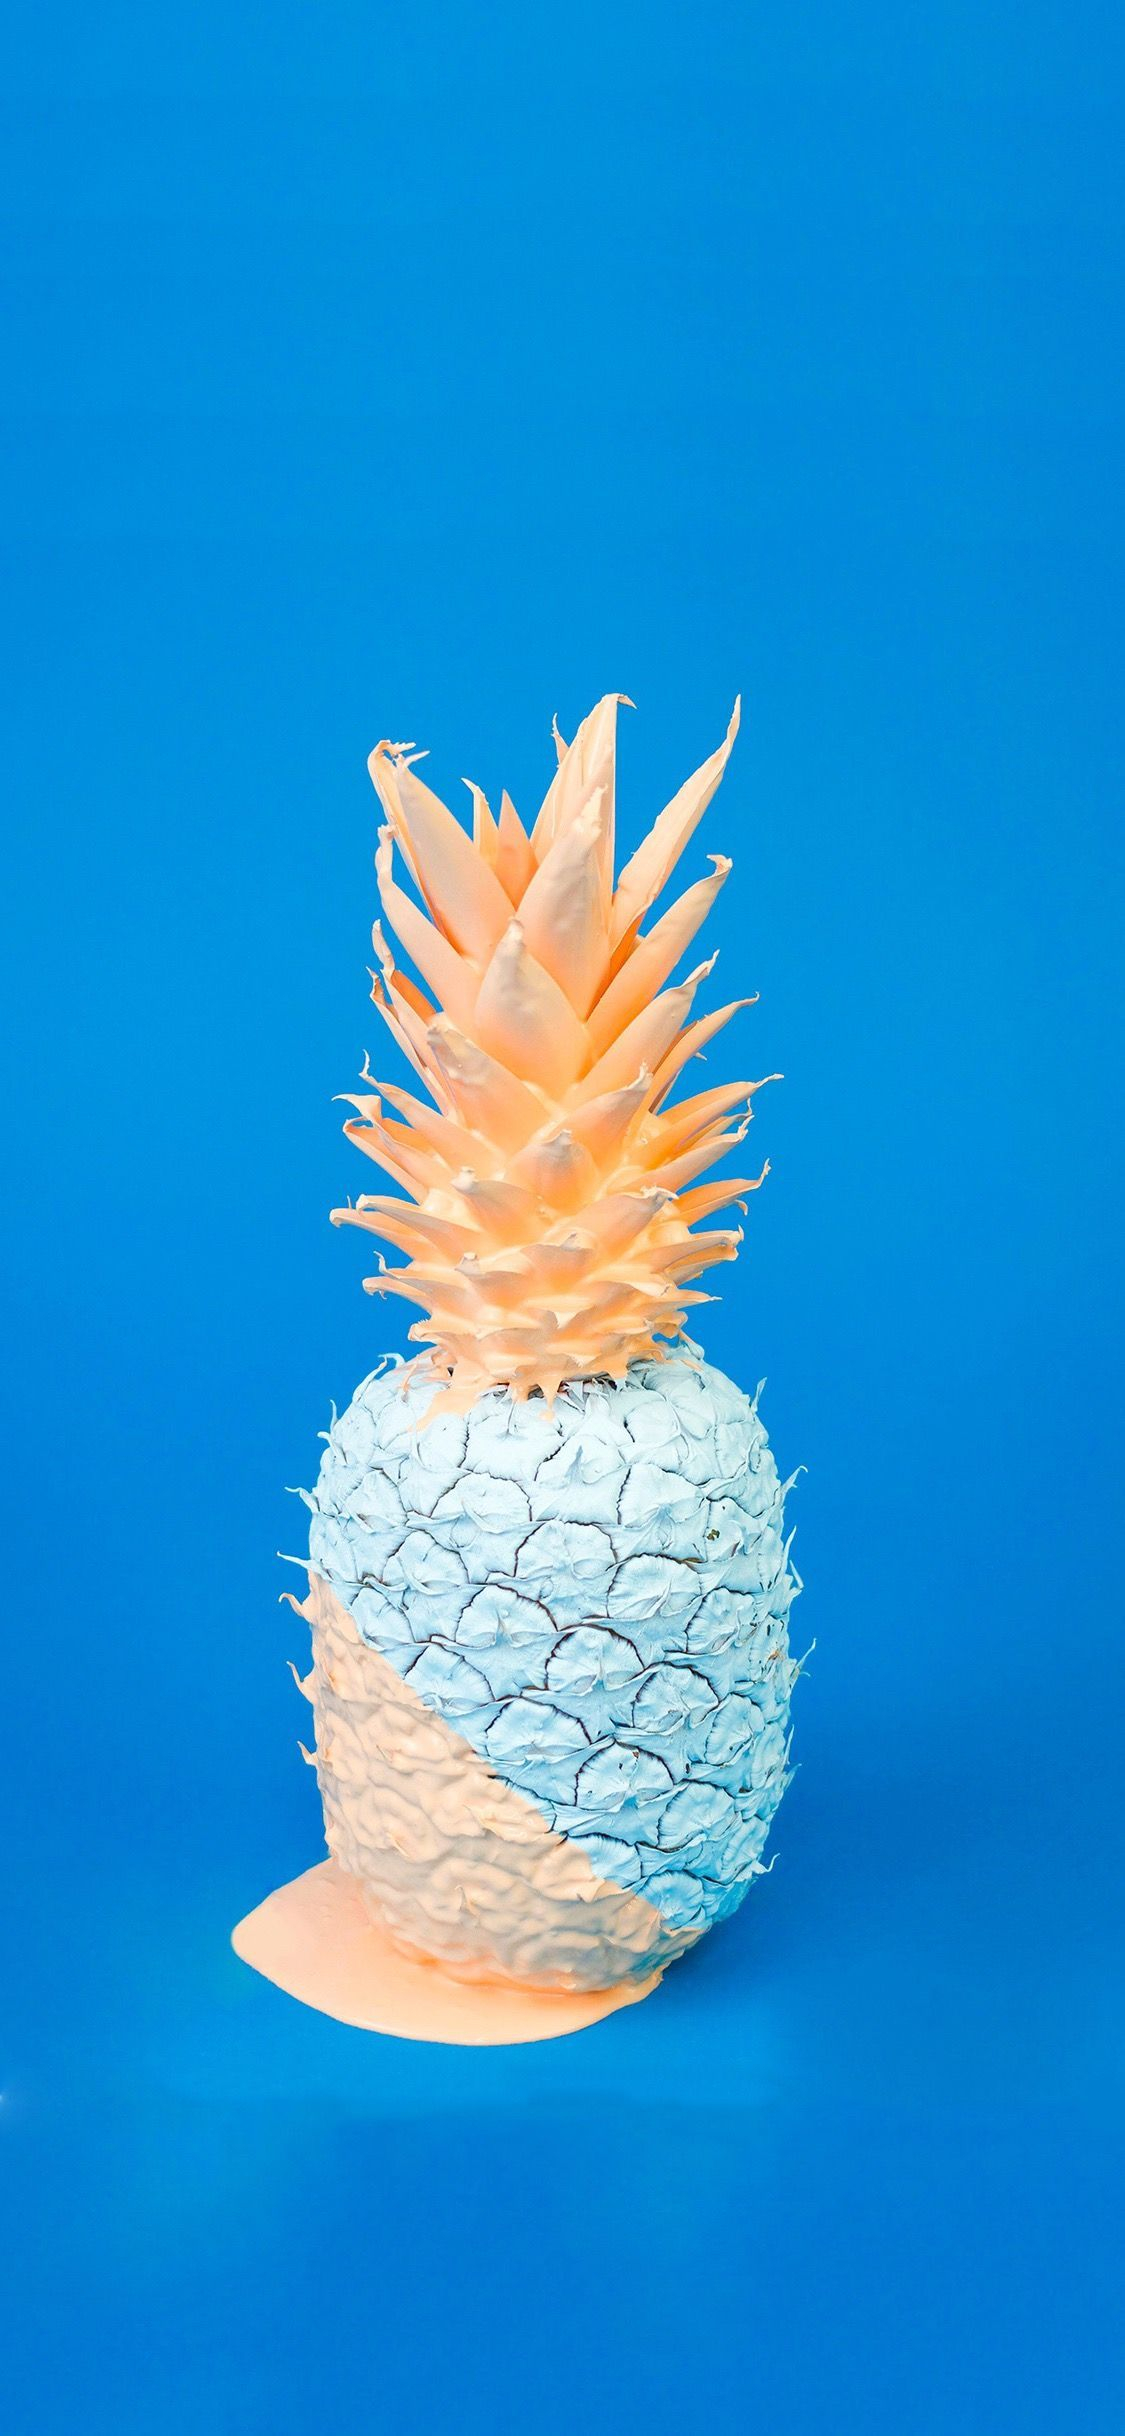 1125x2436 Blue Pineapple Wallpapers Top Free Blue Pineapple Backgrounds